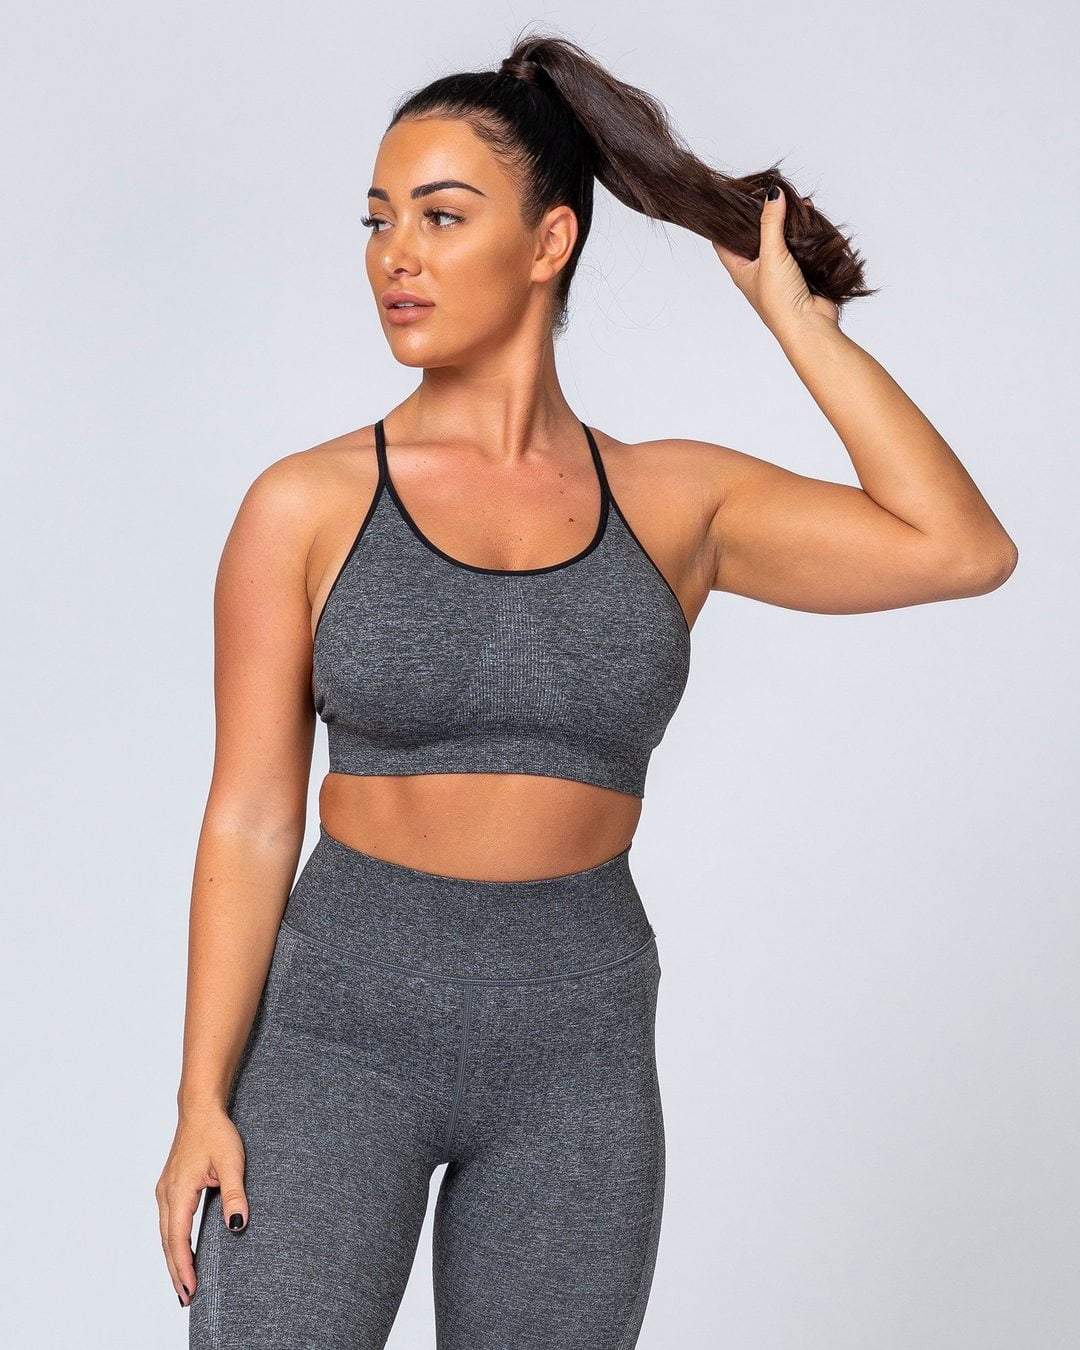 musclenation All Day Strap Seamless Bra - Charcoal Marl